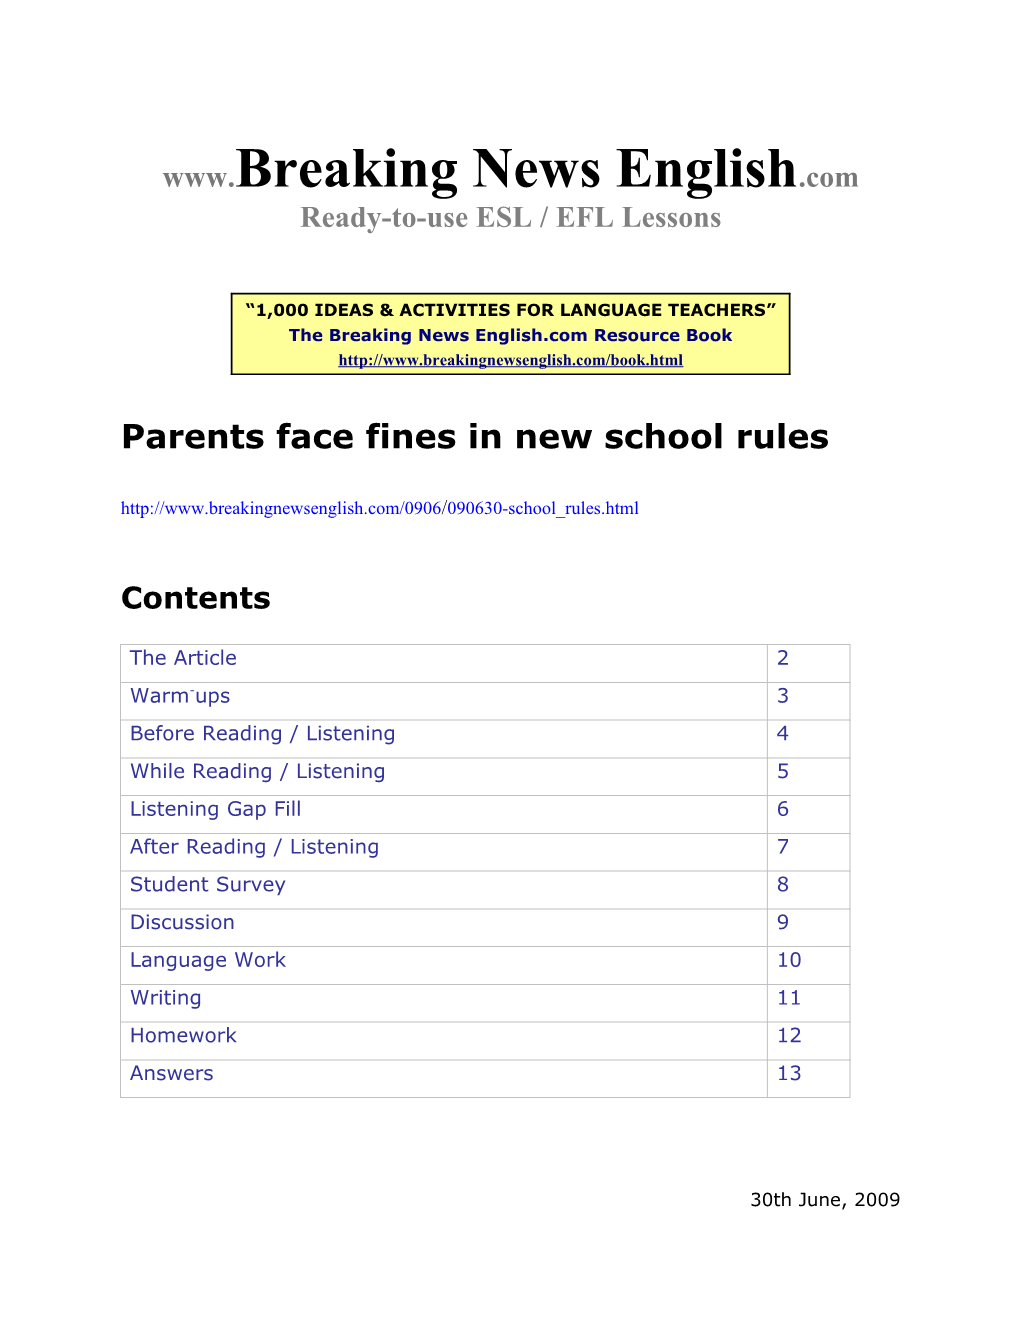 ESL Lesson: Parents Face Fines in New School Rules